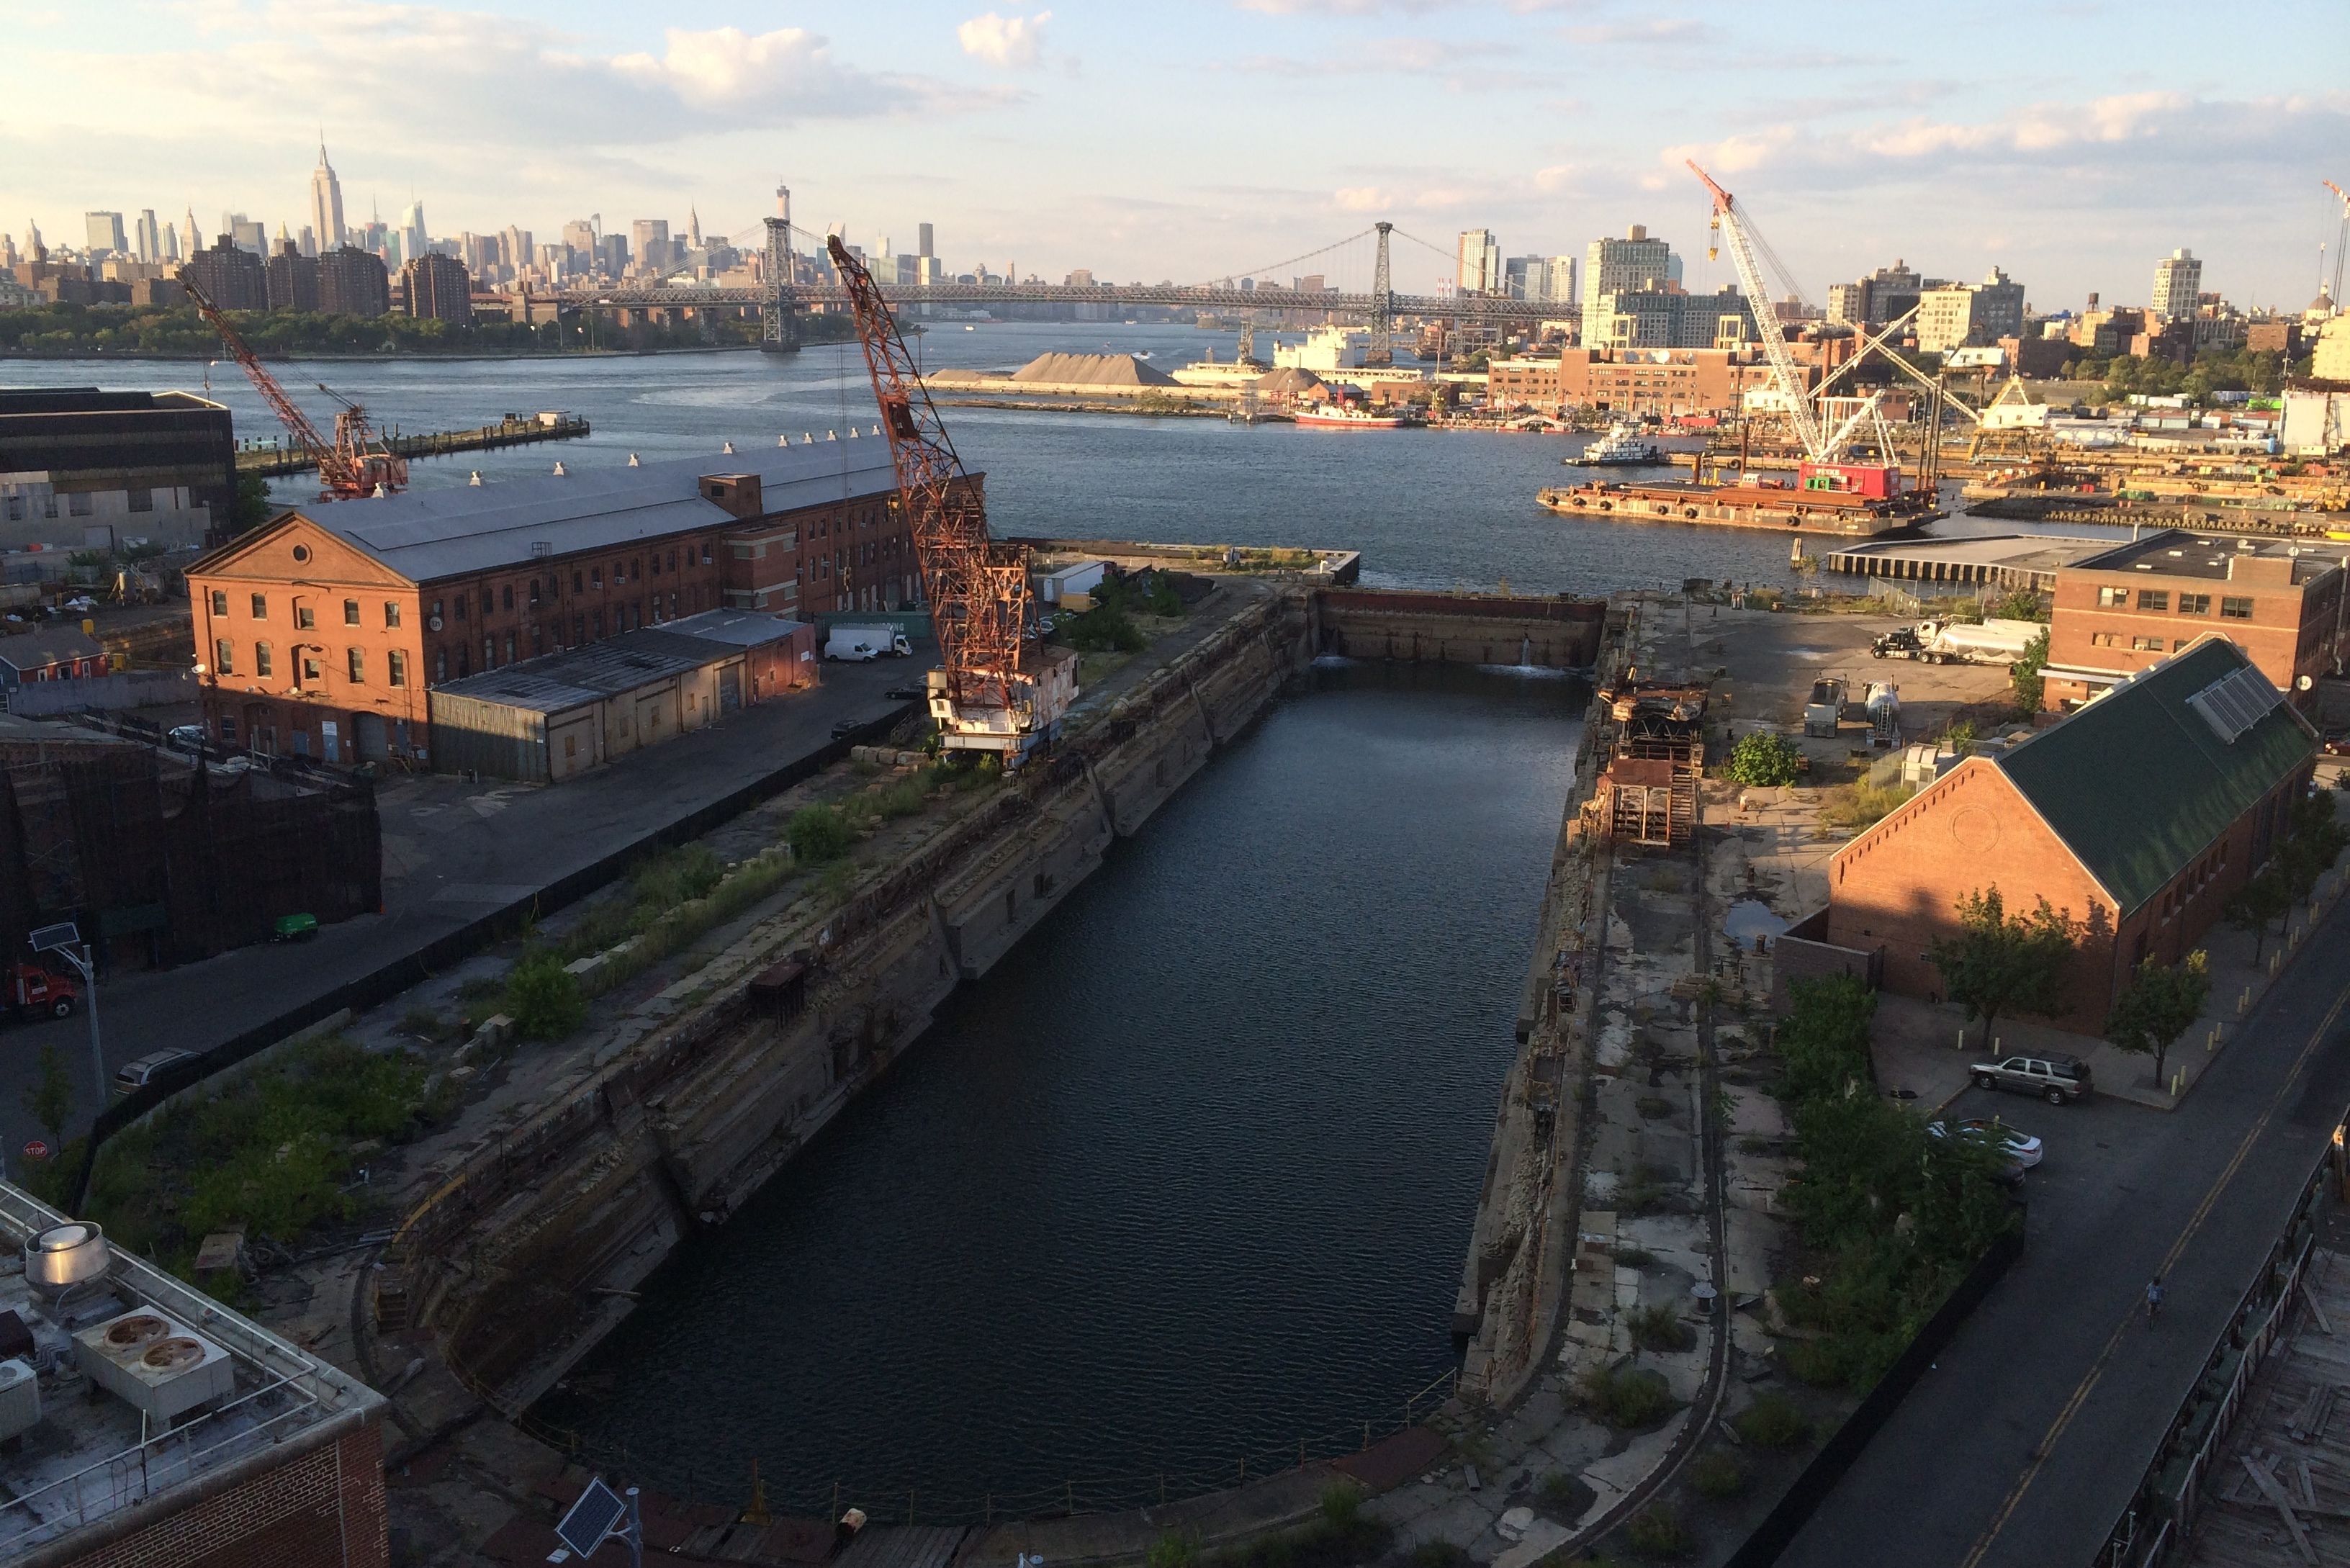 Photo at dusk from rooftop of Brooklyn Navy Yard showing the dry dock, bring buildings and cranes.